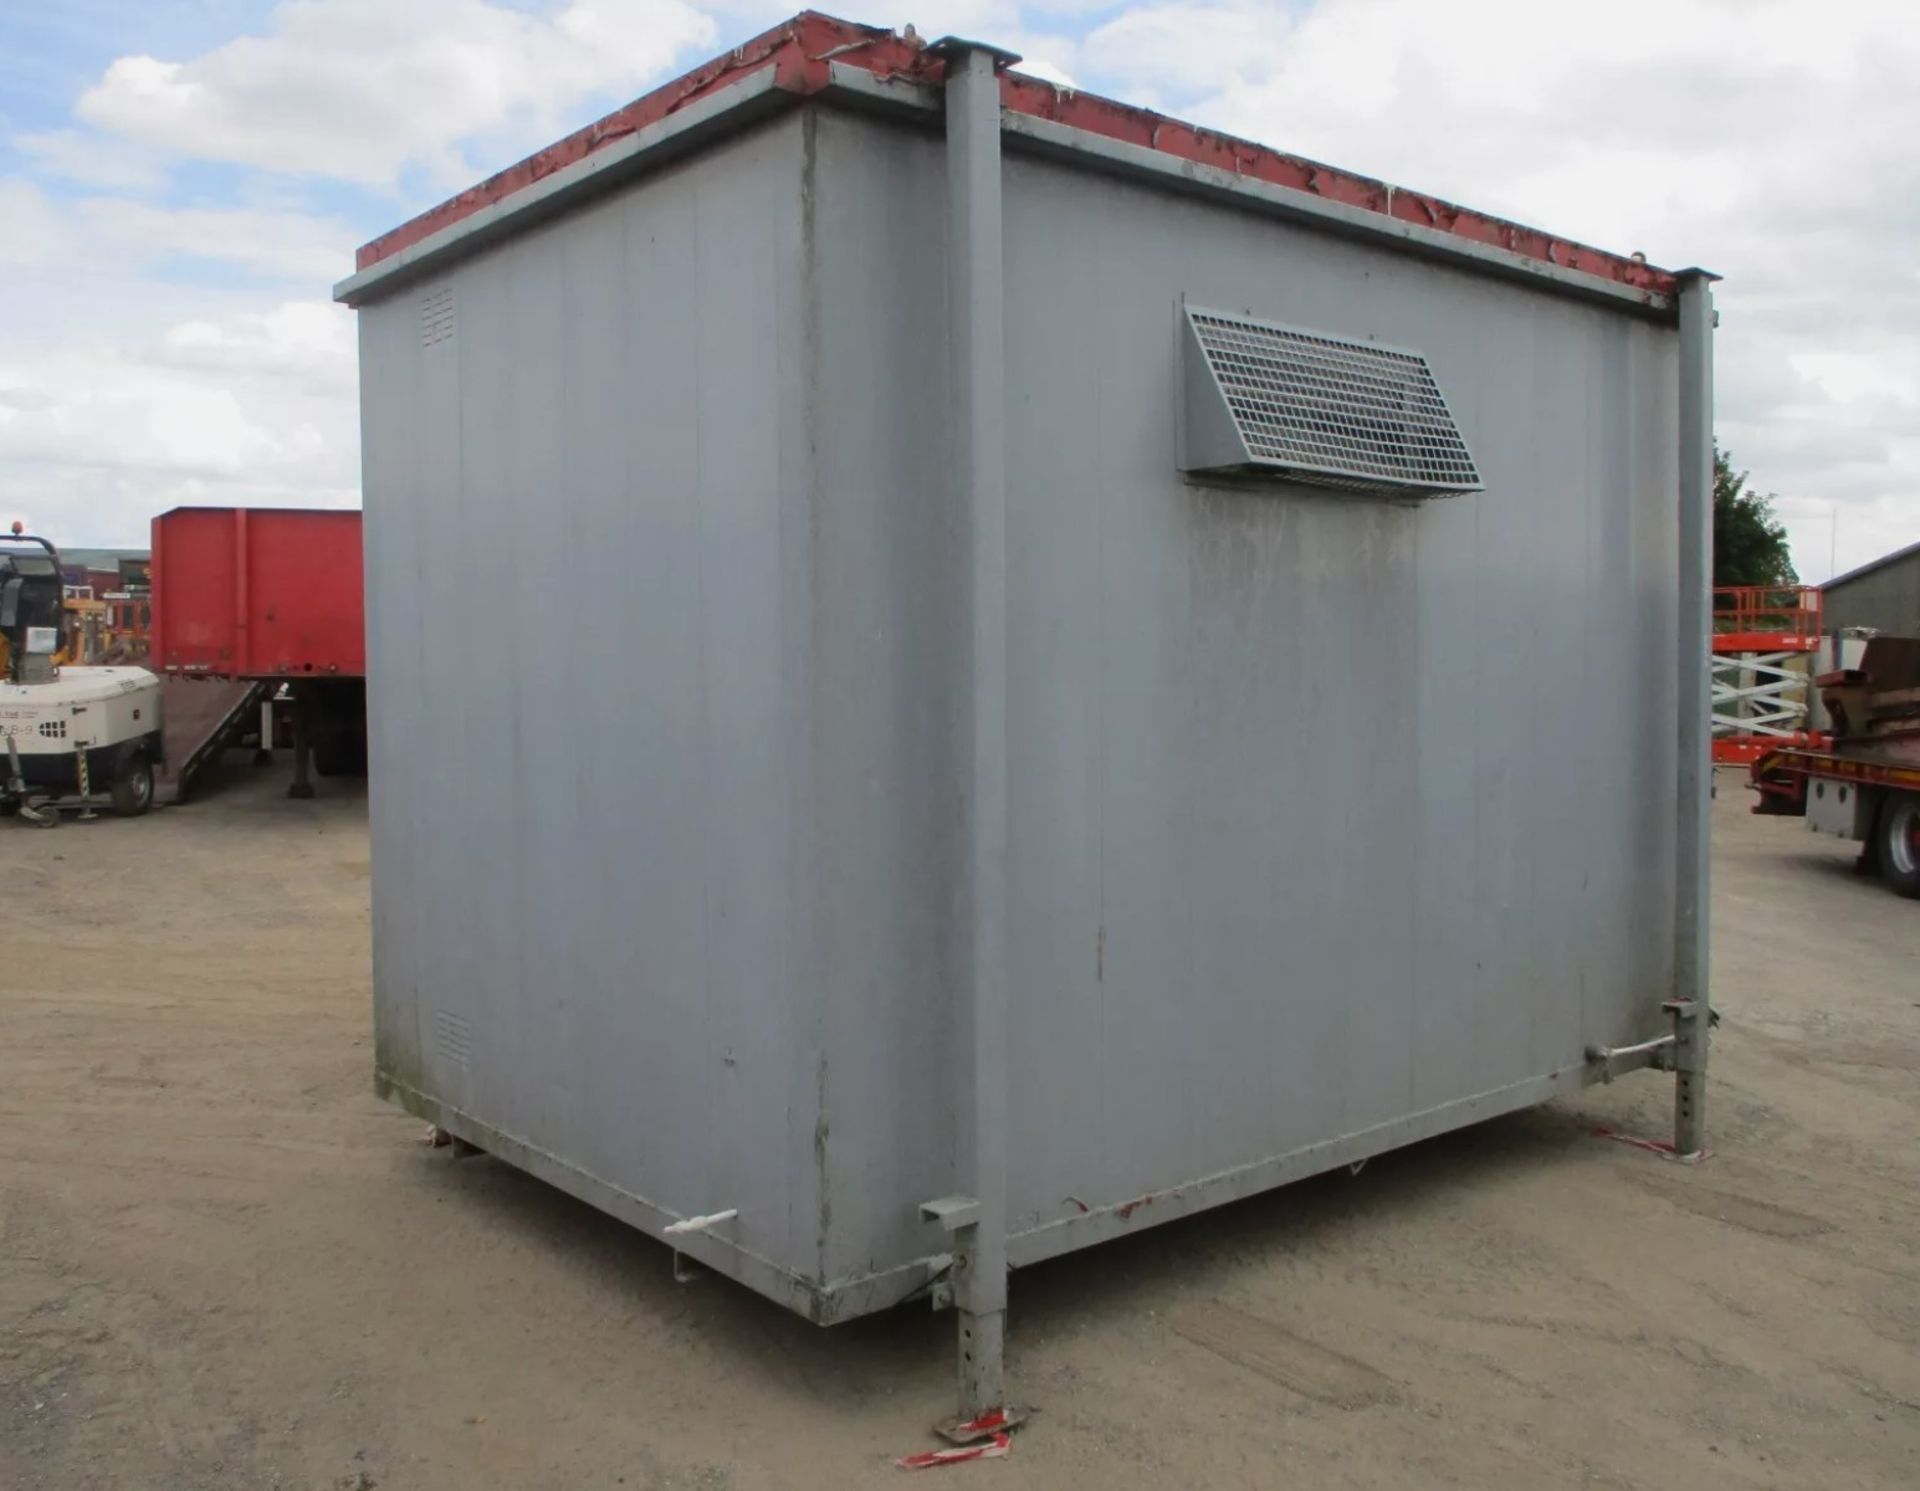 SHIPPING CONTAINER TOILET BLOCK: YOUR PORTABLE SANITATION SOLUTION - Image 3 of 11